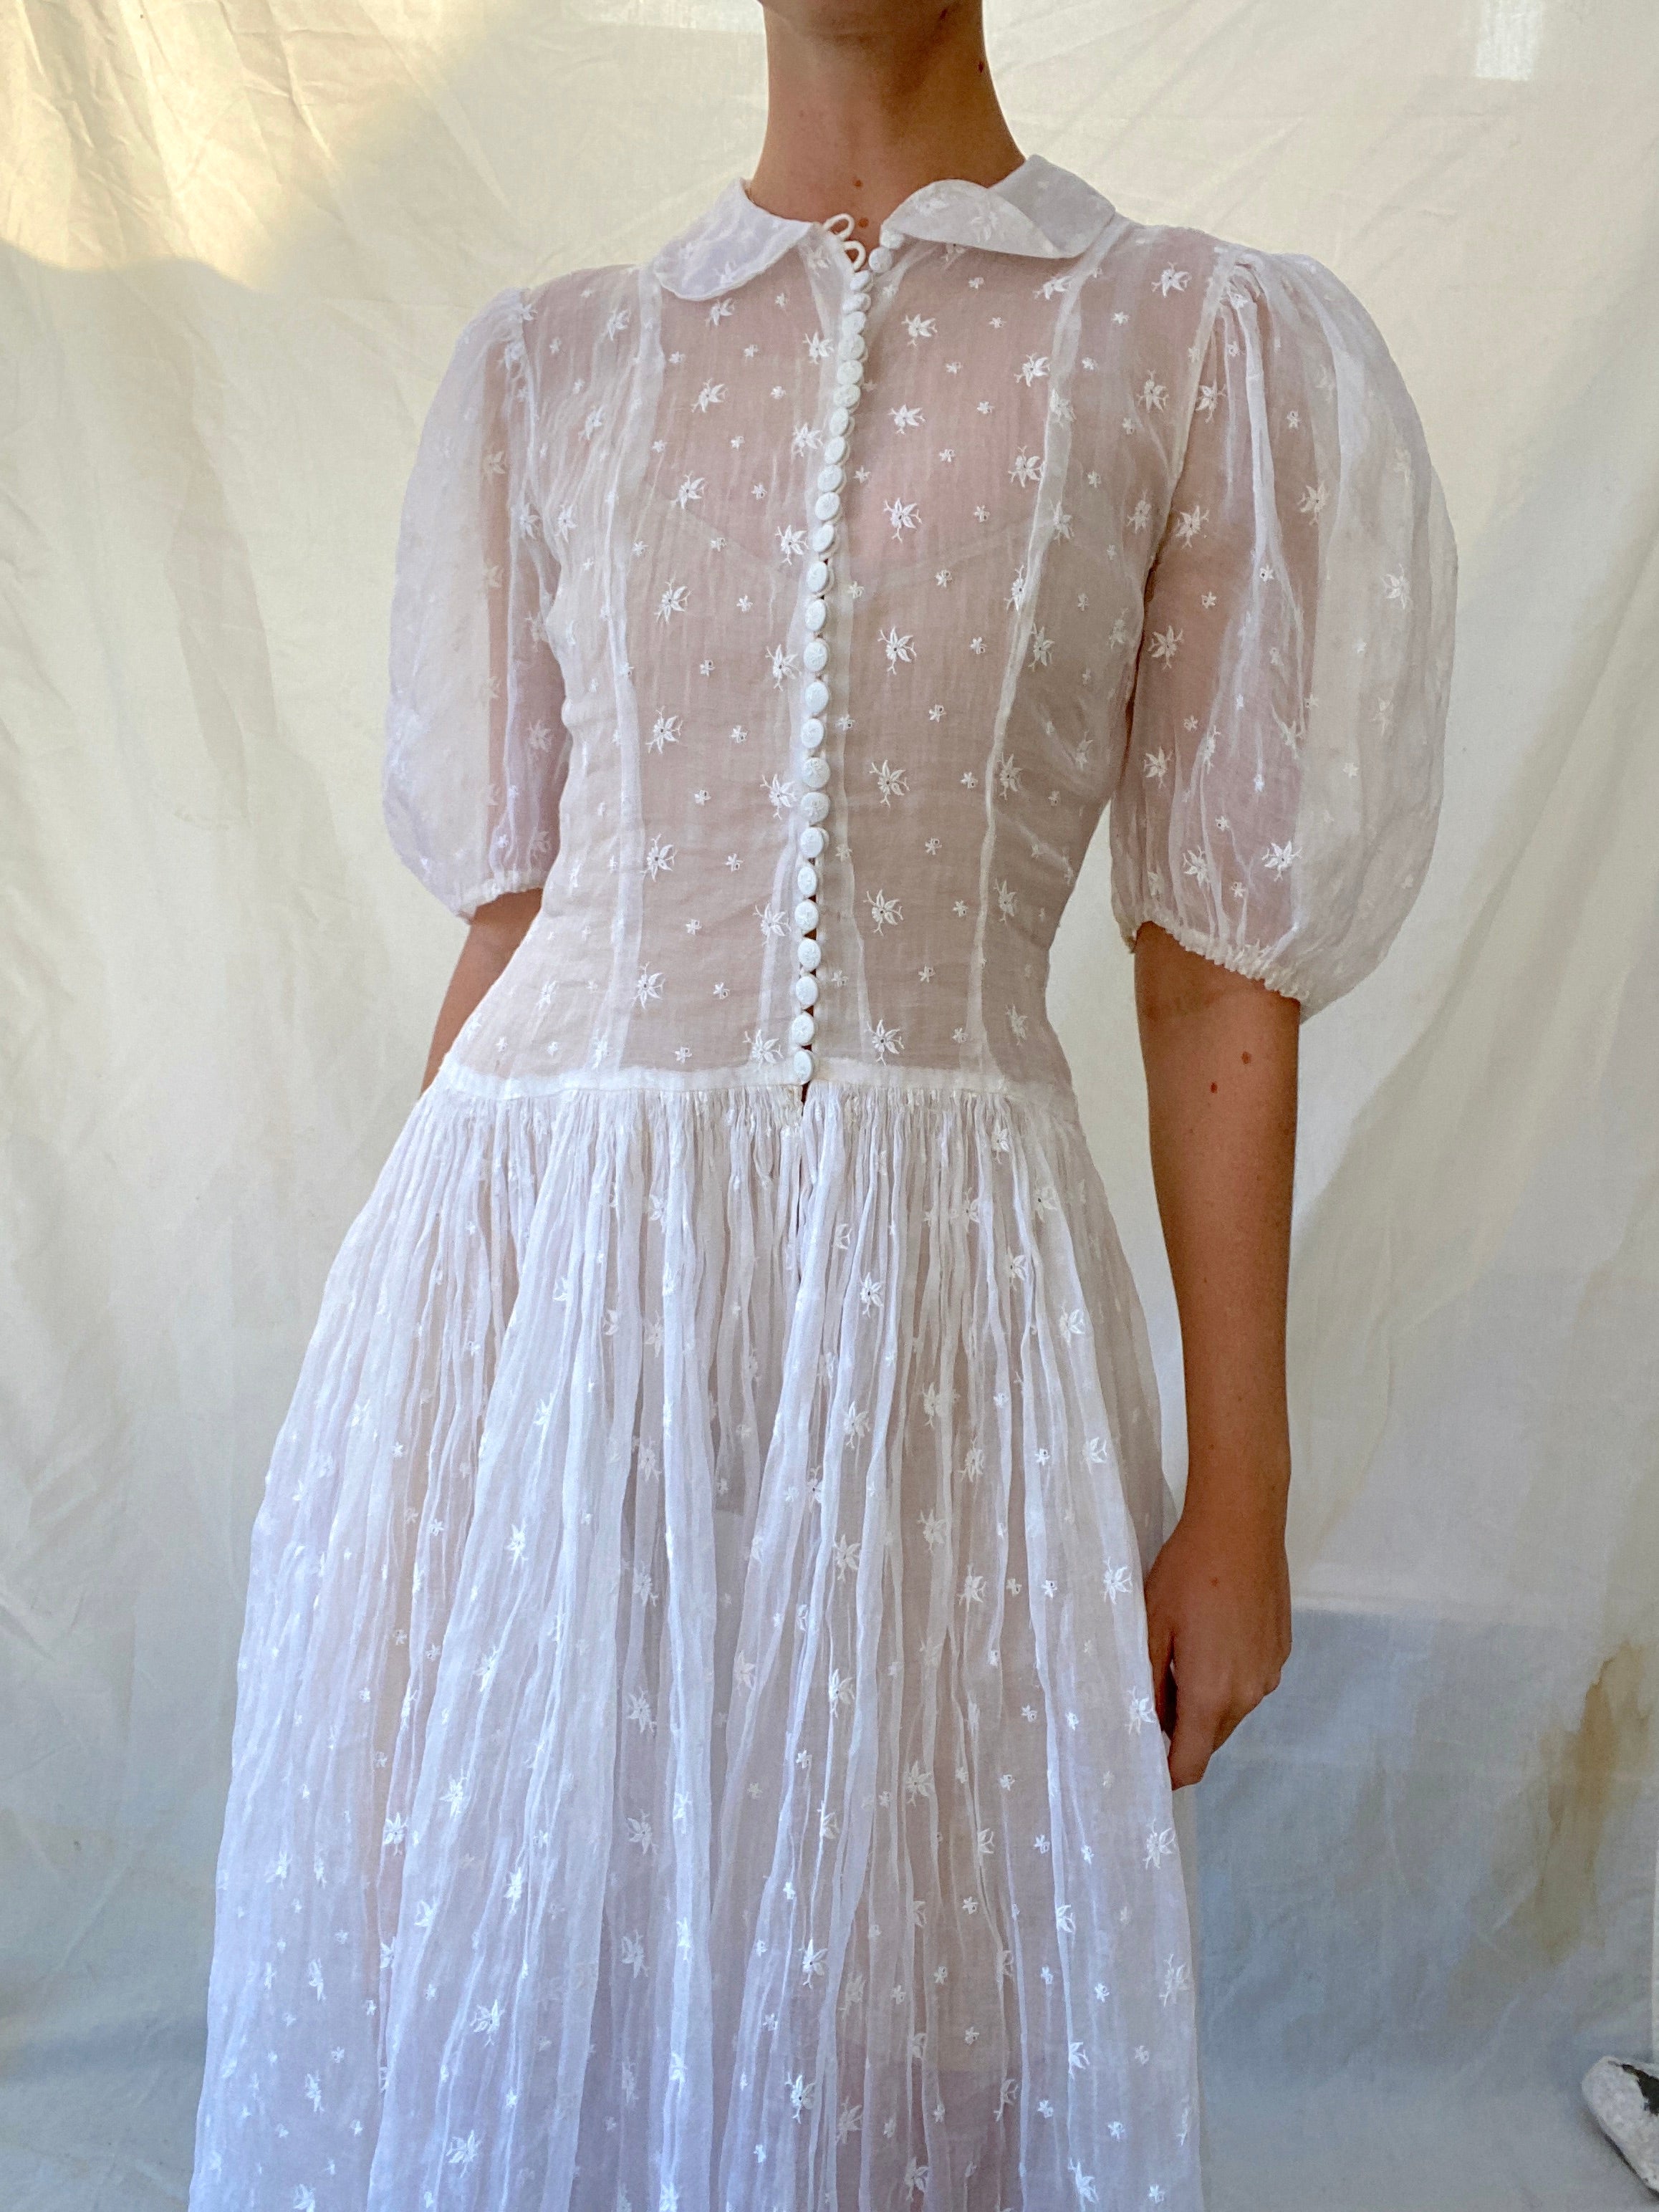 1930's White Organza Dress with Puffed Sleeves and Floral Embroidery